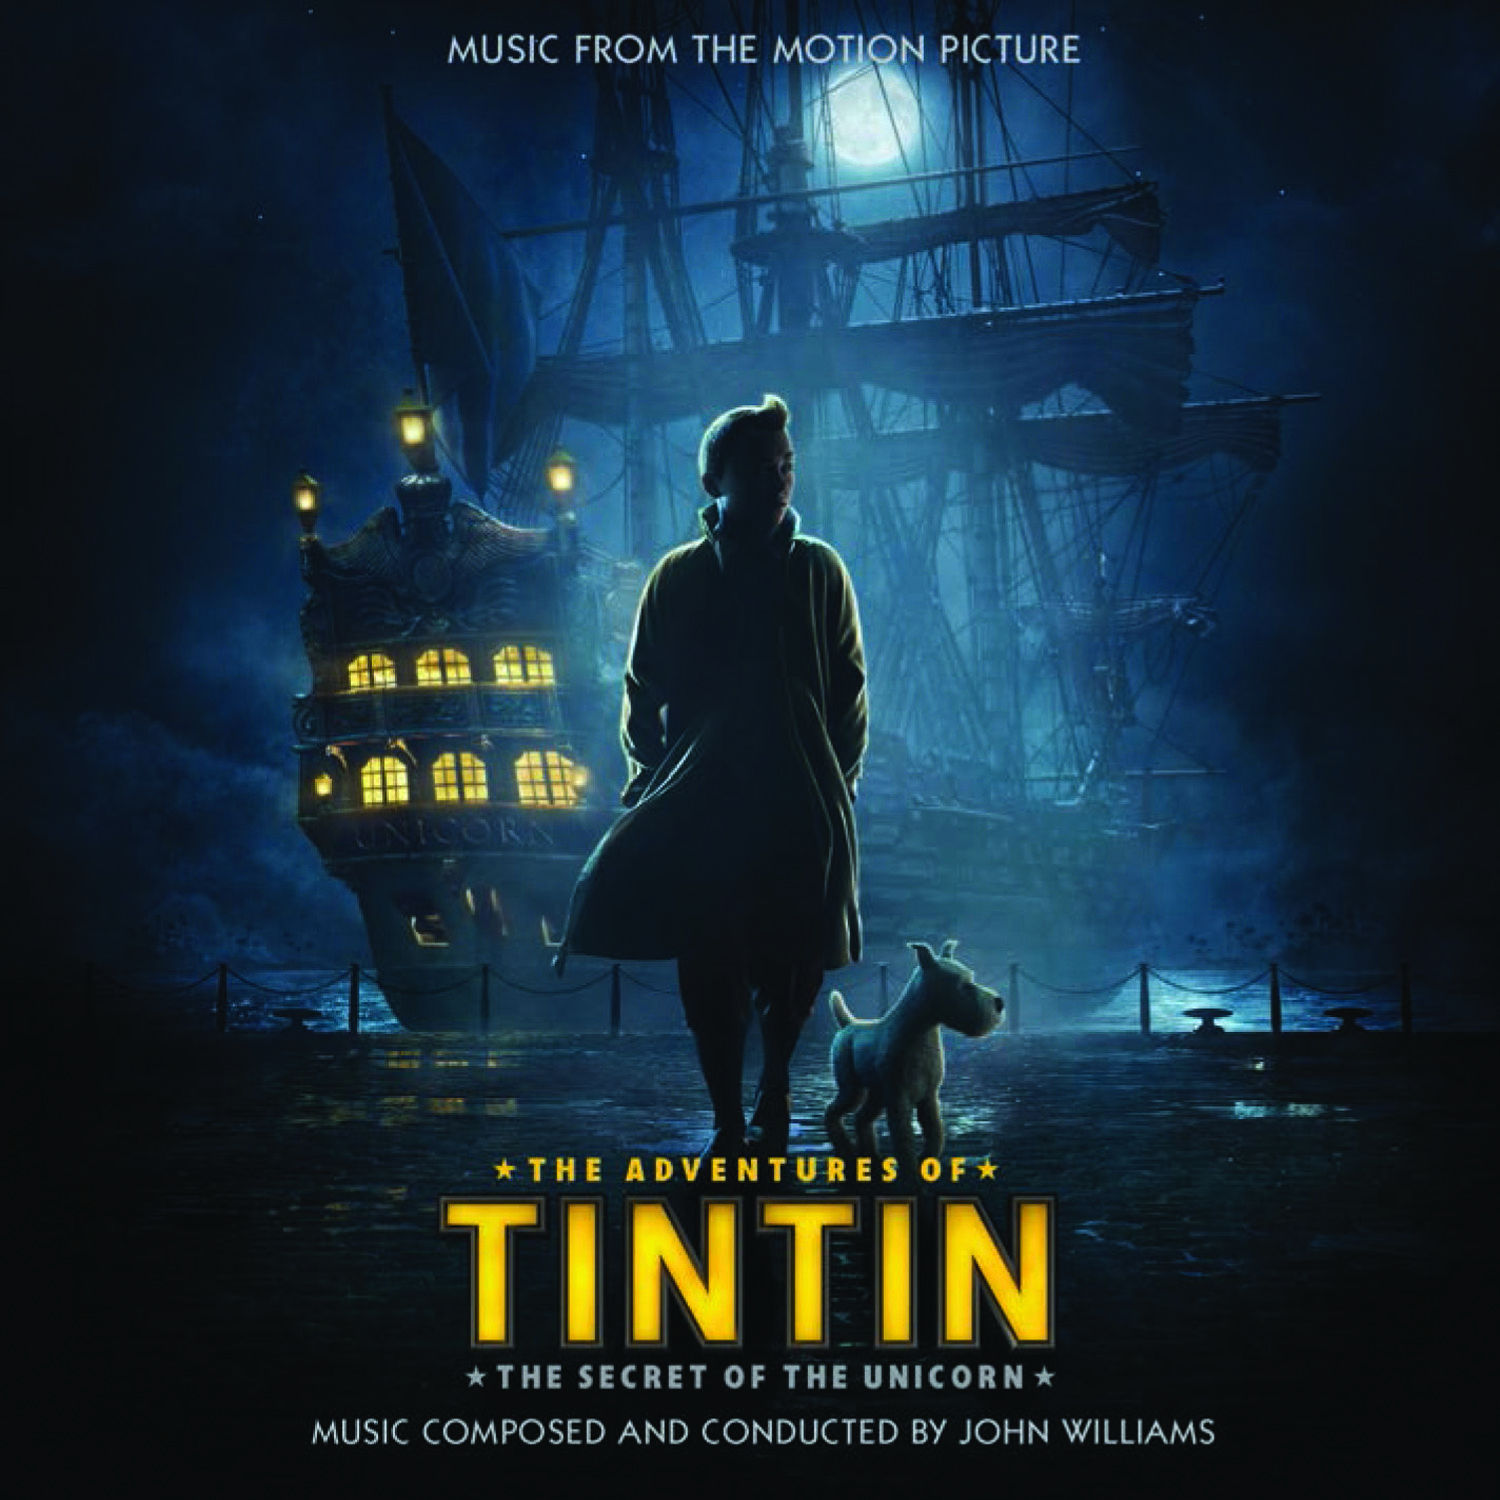 CD GIVEAWAY – Win THE ADVENTURES OF TINTIN Soundtrack Available From ...